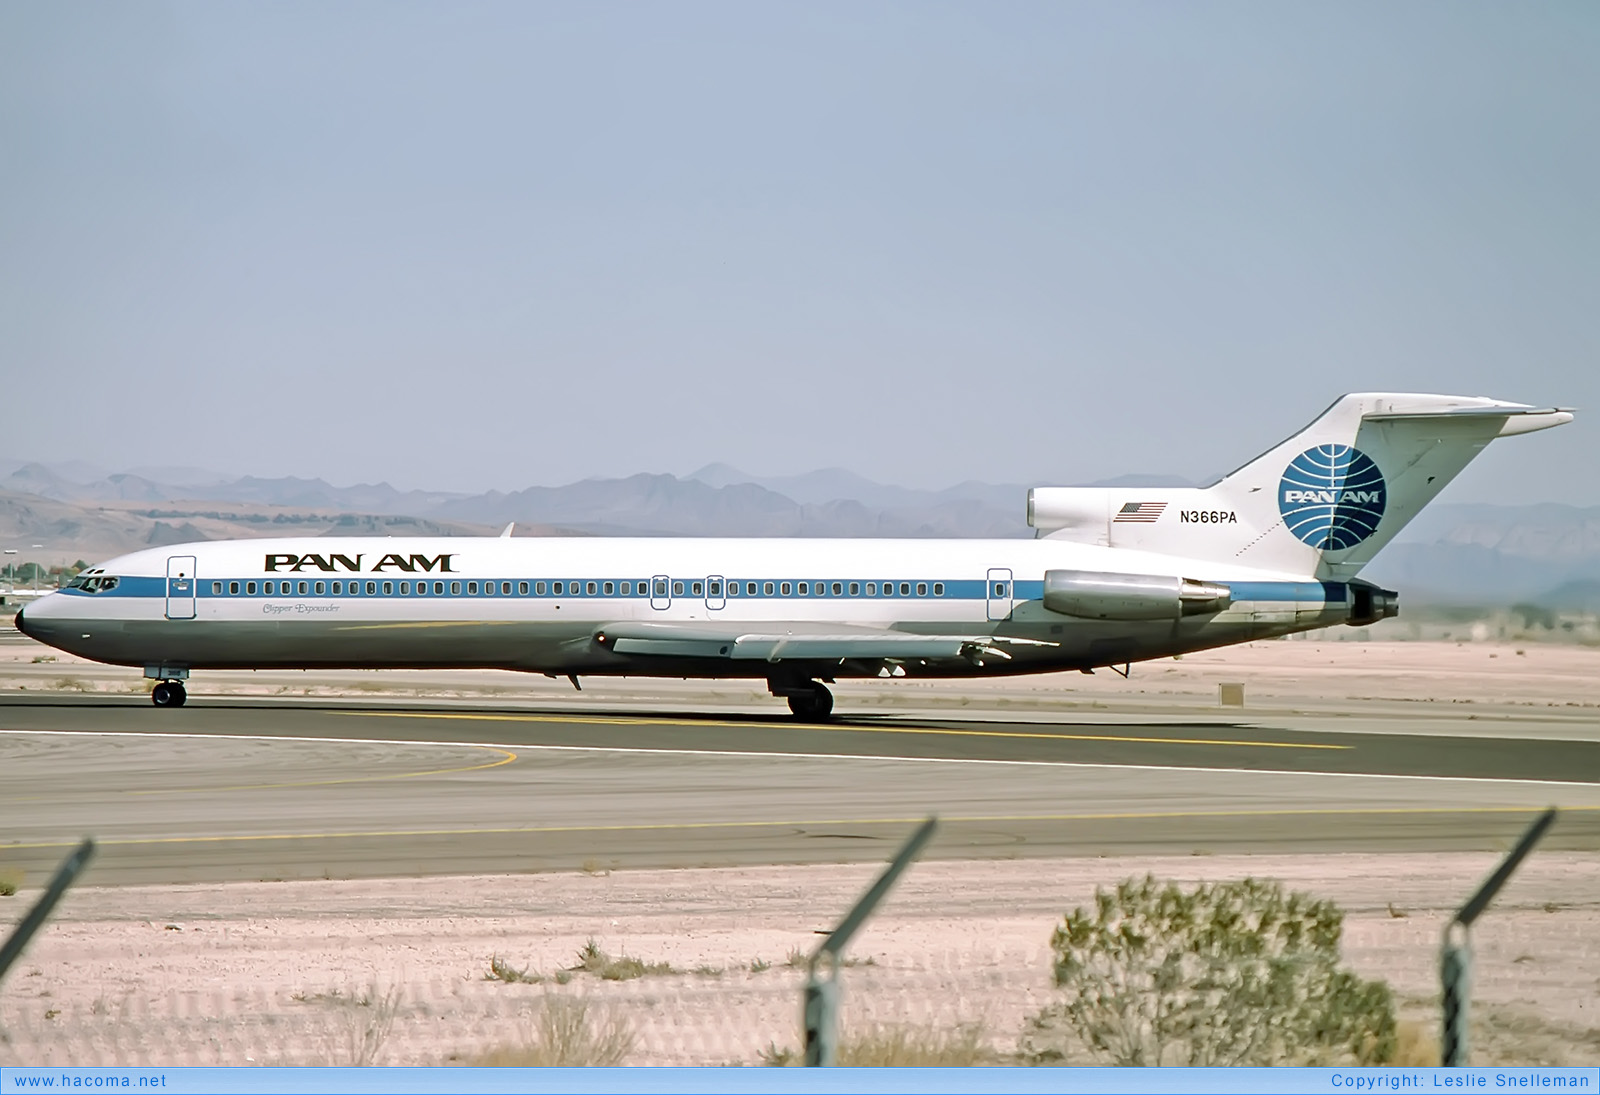 Photo of N366PA - Pan Am Clipper Expounder - McCarran International Airport - Oct 8, 1982